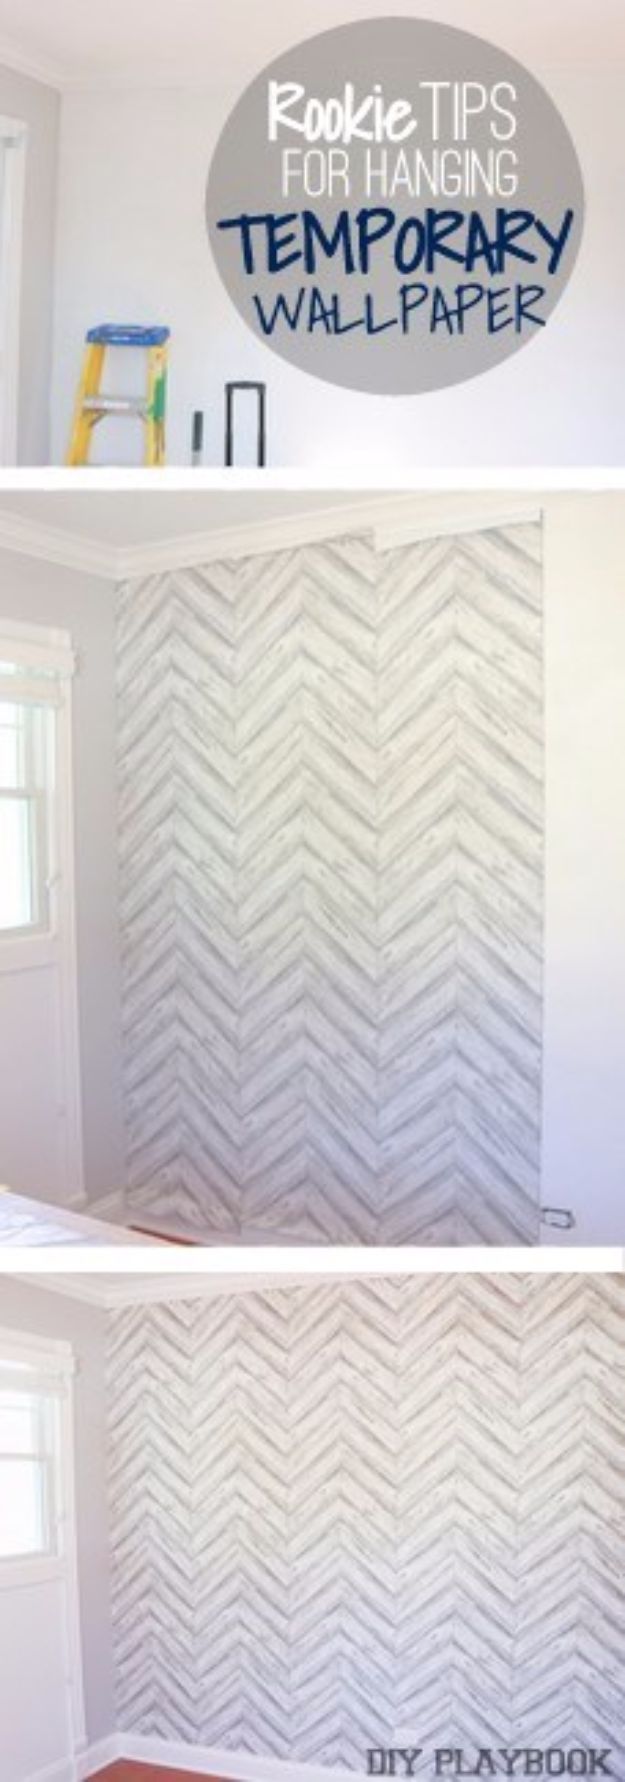 DIY Hacks for Renters - Temporary Wallpapers - Easy Ways to Decorate and Fix Things on Rental Property - Decorate Walls, Cheap Ideas for Making an Apartment, Small Space or Tiny Closet Work For You - Quick Hacks and DIY Projects on A Budget - Step by Step Tutorials and Instructions for Simple Home Decor http://diyjoy.com/diy-hacks-renters